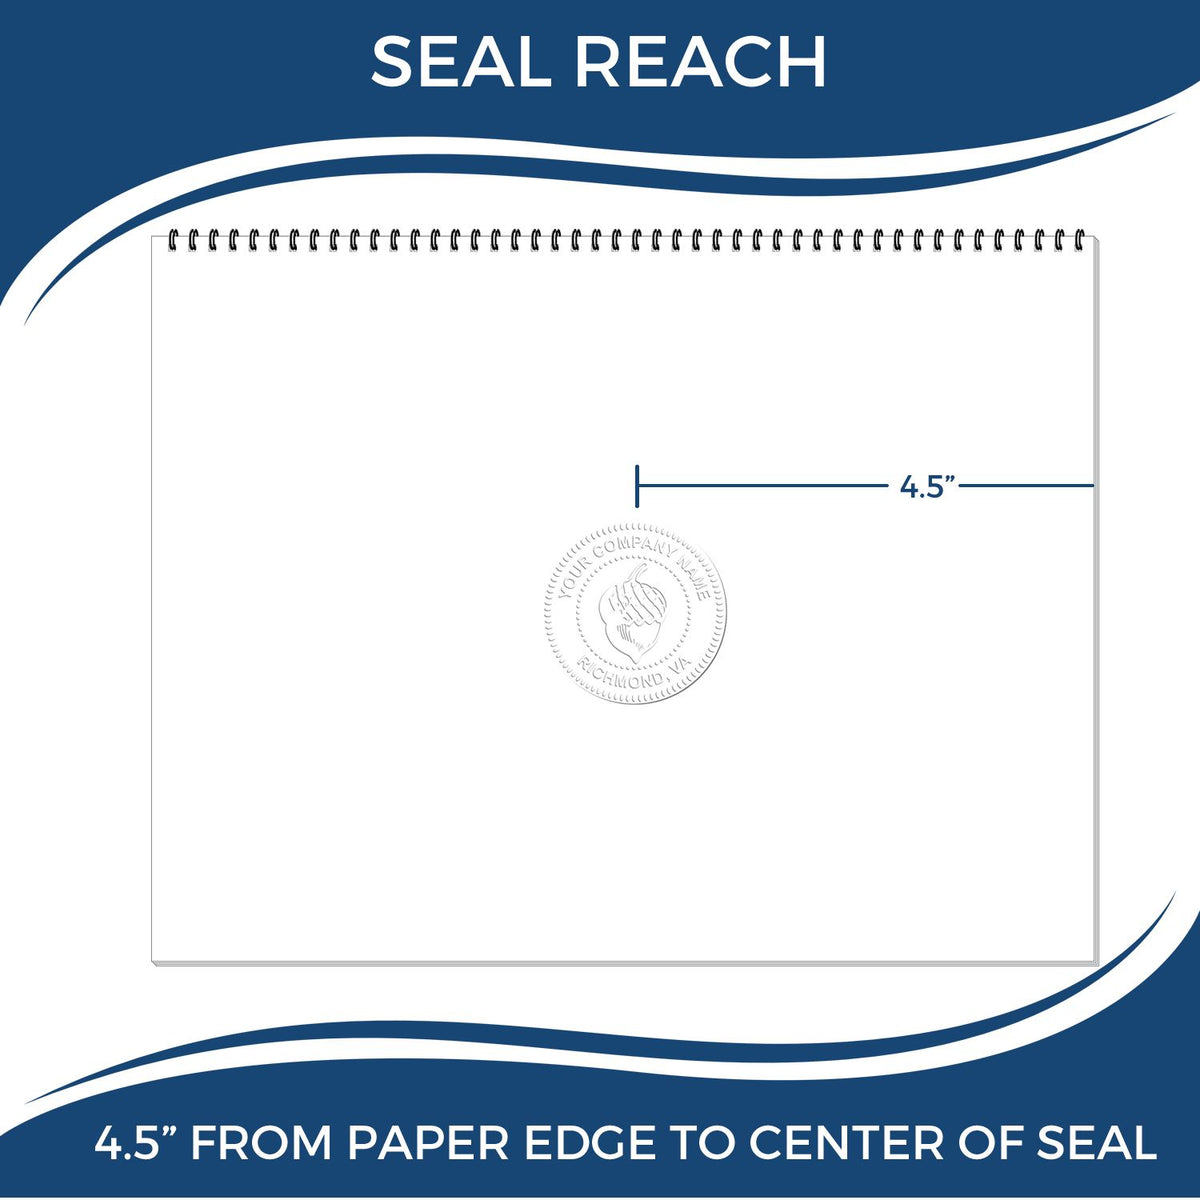 An infographic showing the seal reach which is represented by a ruler and a miniature seal image of the State of Nebraska Extended Long Reach Engineer Seal